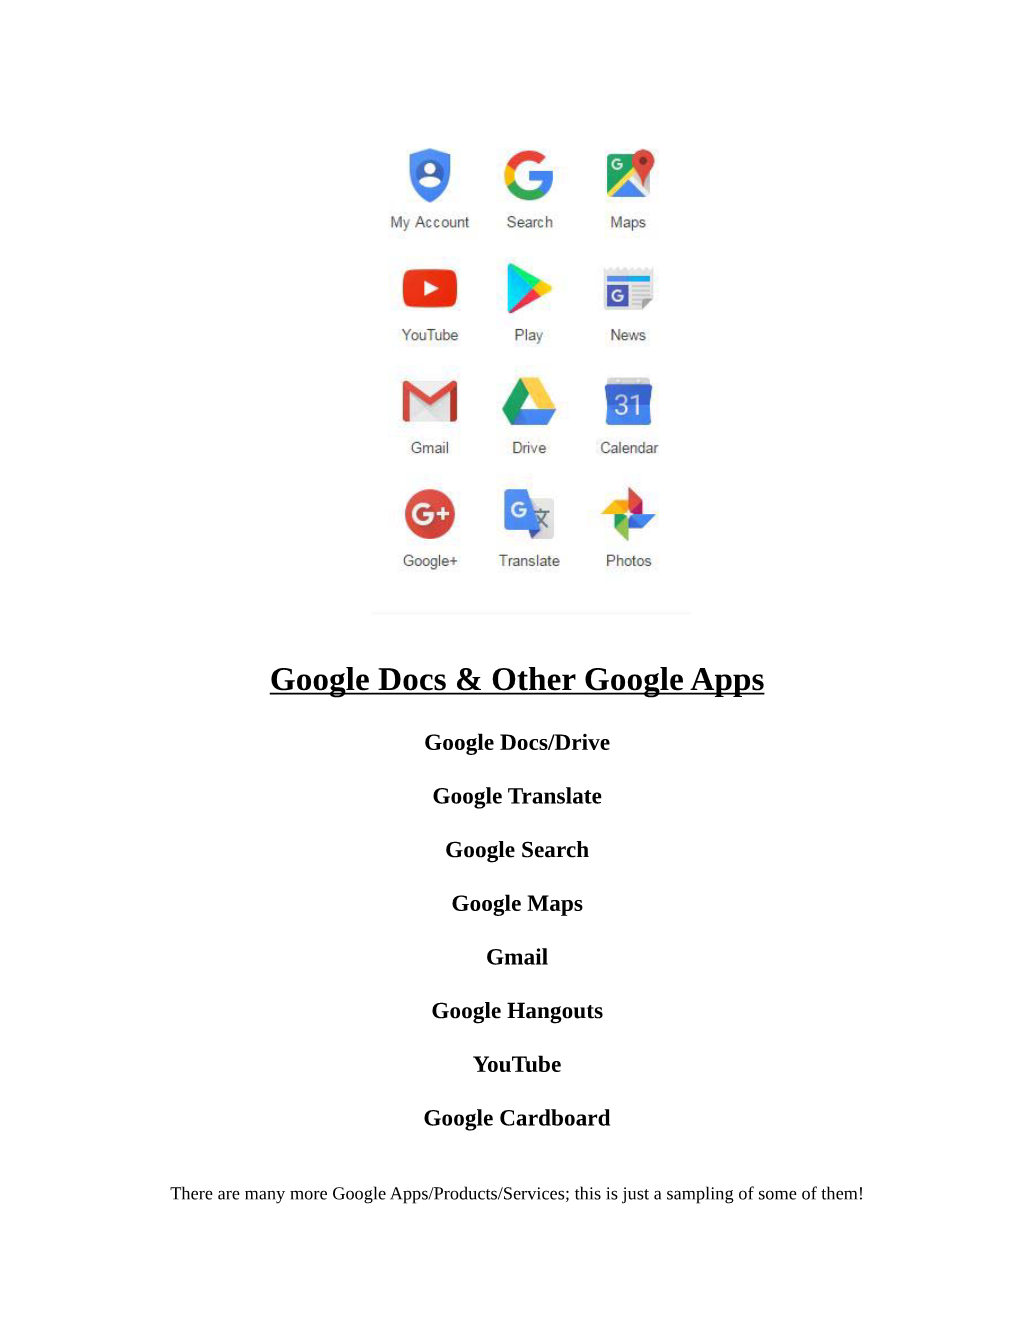 Google Docs and Apps